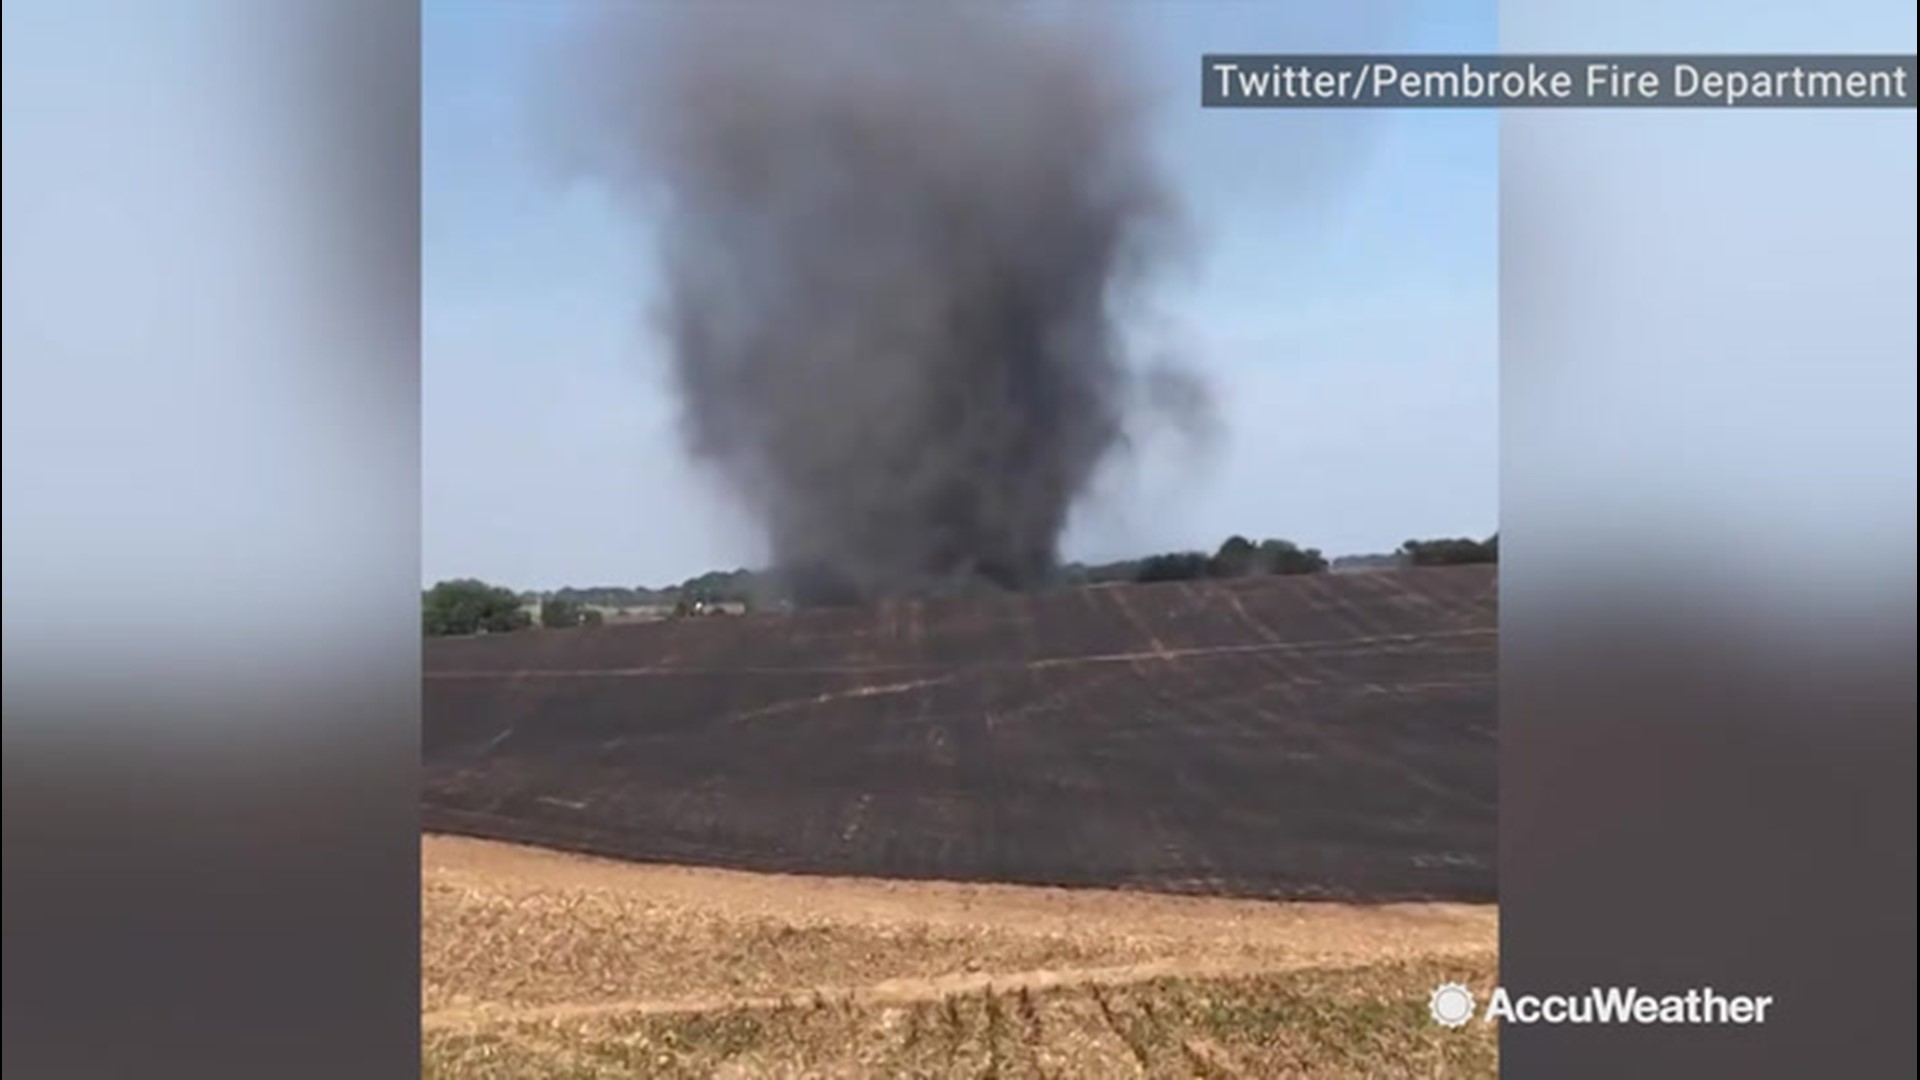 The Pembroke Fire Department provided this footage from Oak Grove, Kentucky, of an outdoor fire in the distance on Sept. 21.